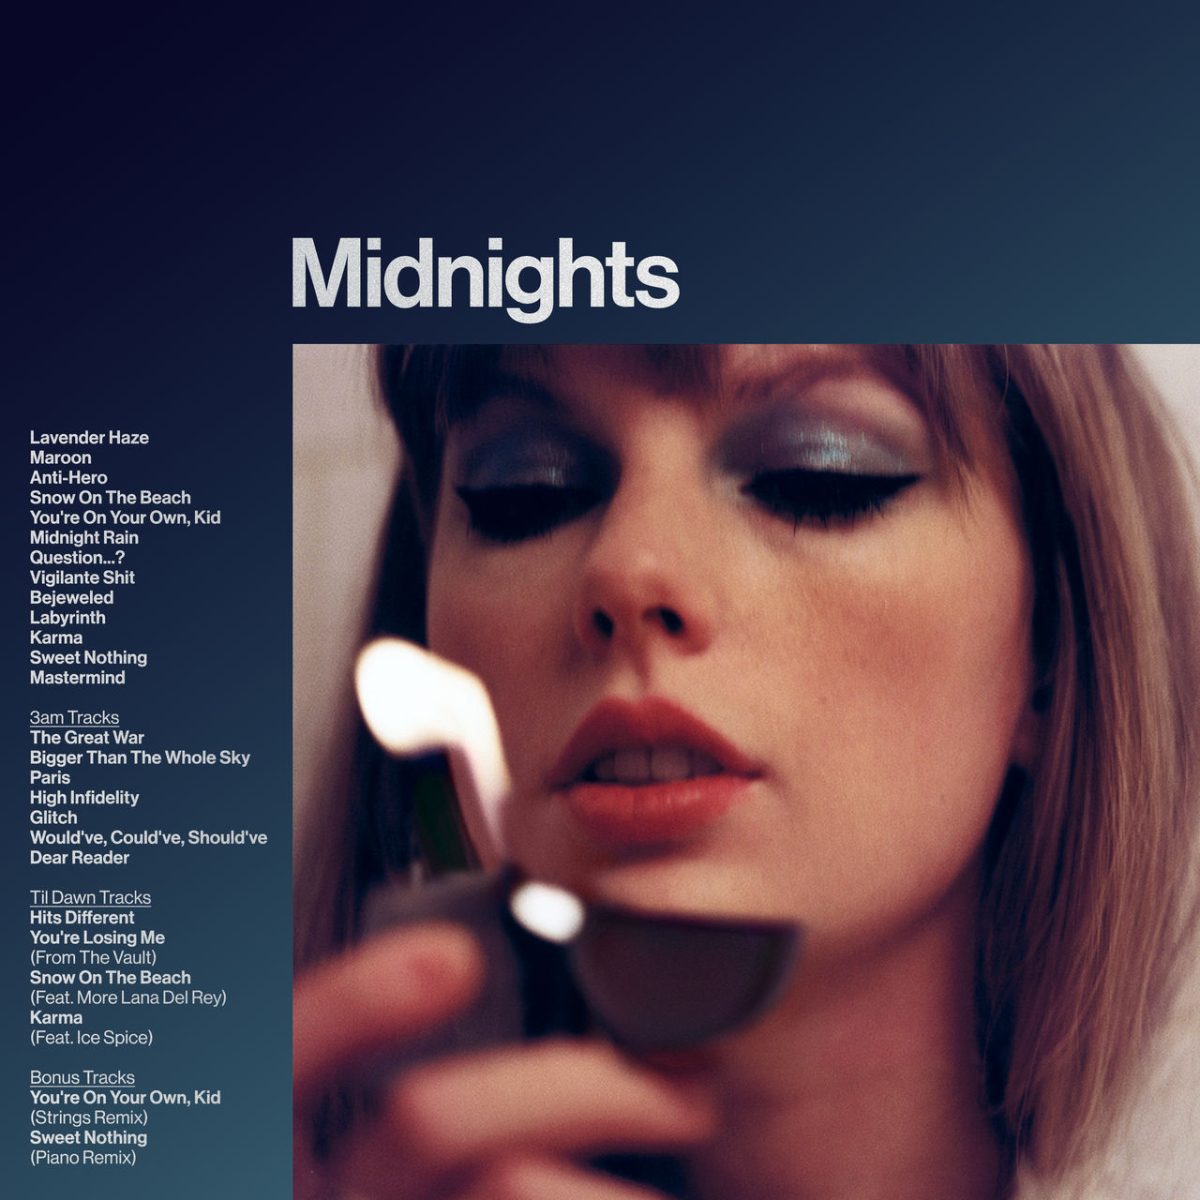 Midnights+by+Taylor+Swift